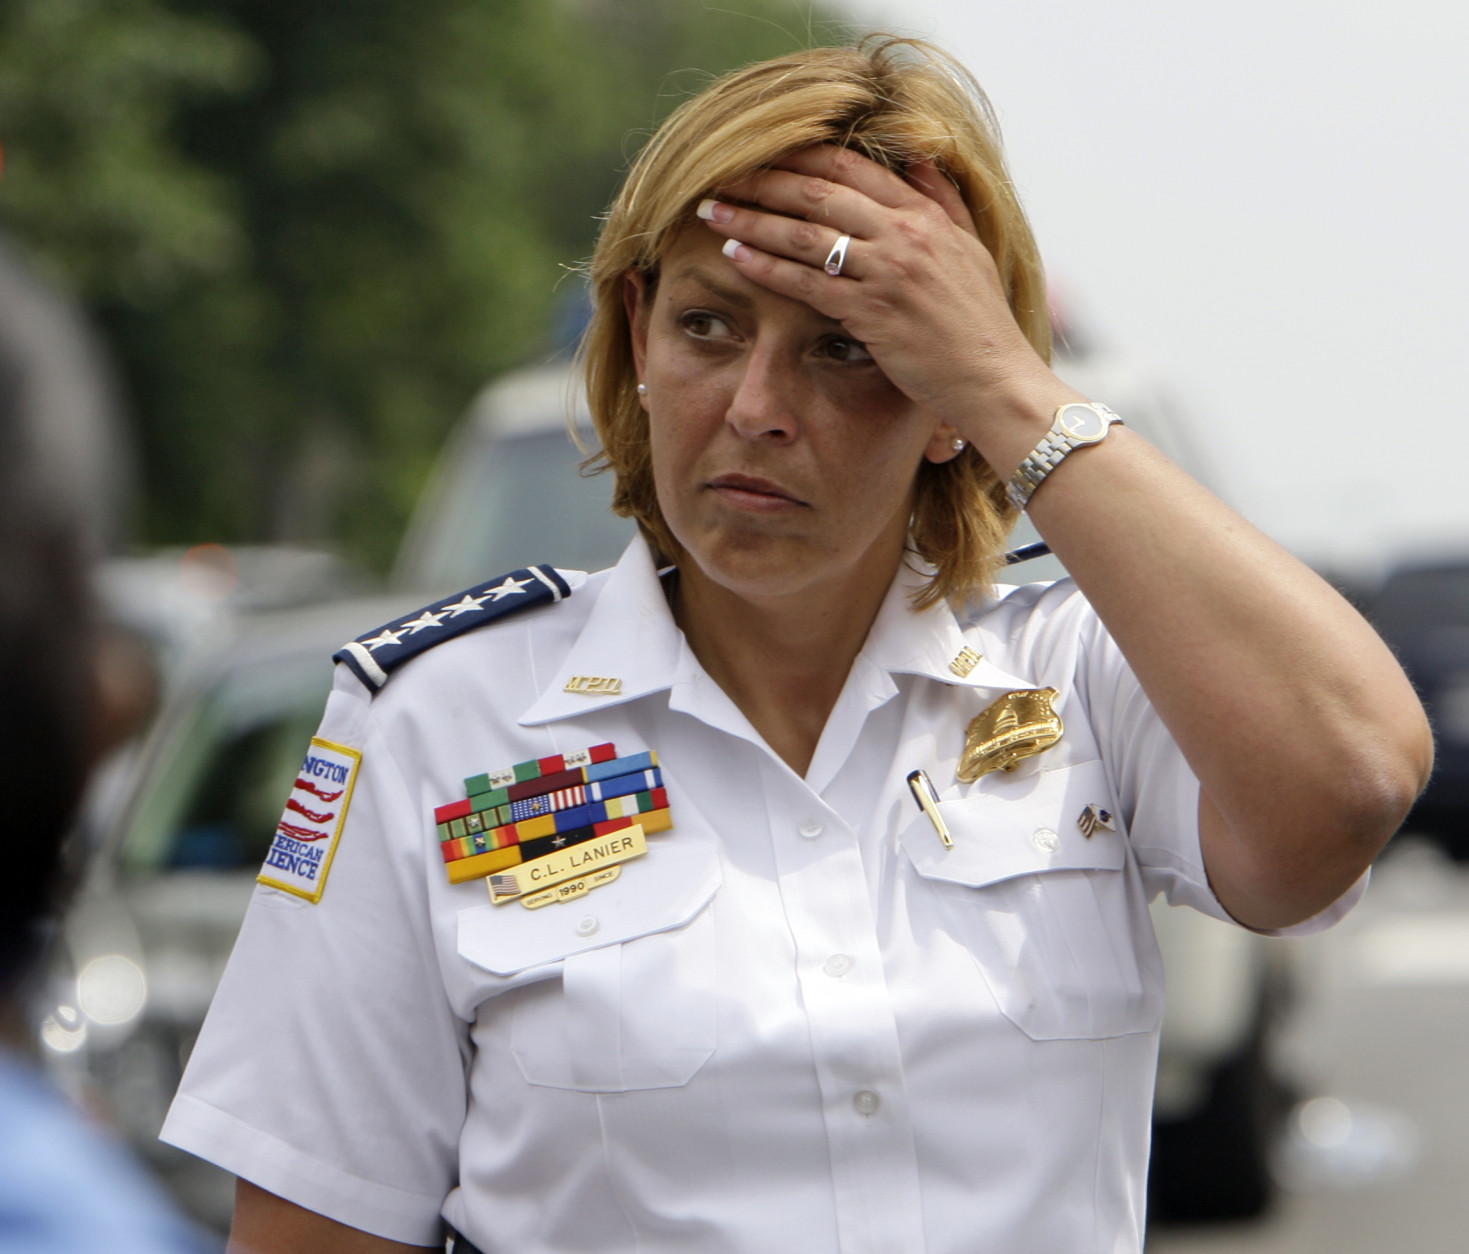 D.C. Police Chief Cathy Lanier wipes her forehead after talking with the media near the U.S. Holocaust Museum after a shooting at the museum in Washington, Wednesday, June 10, 2009.(AP Photo/Alex Brandon)